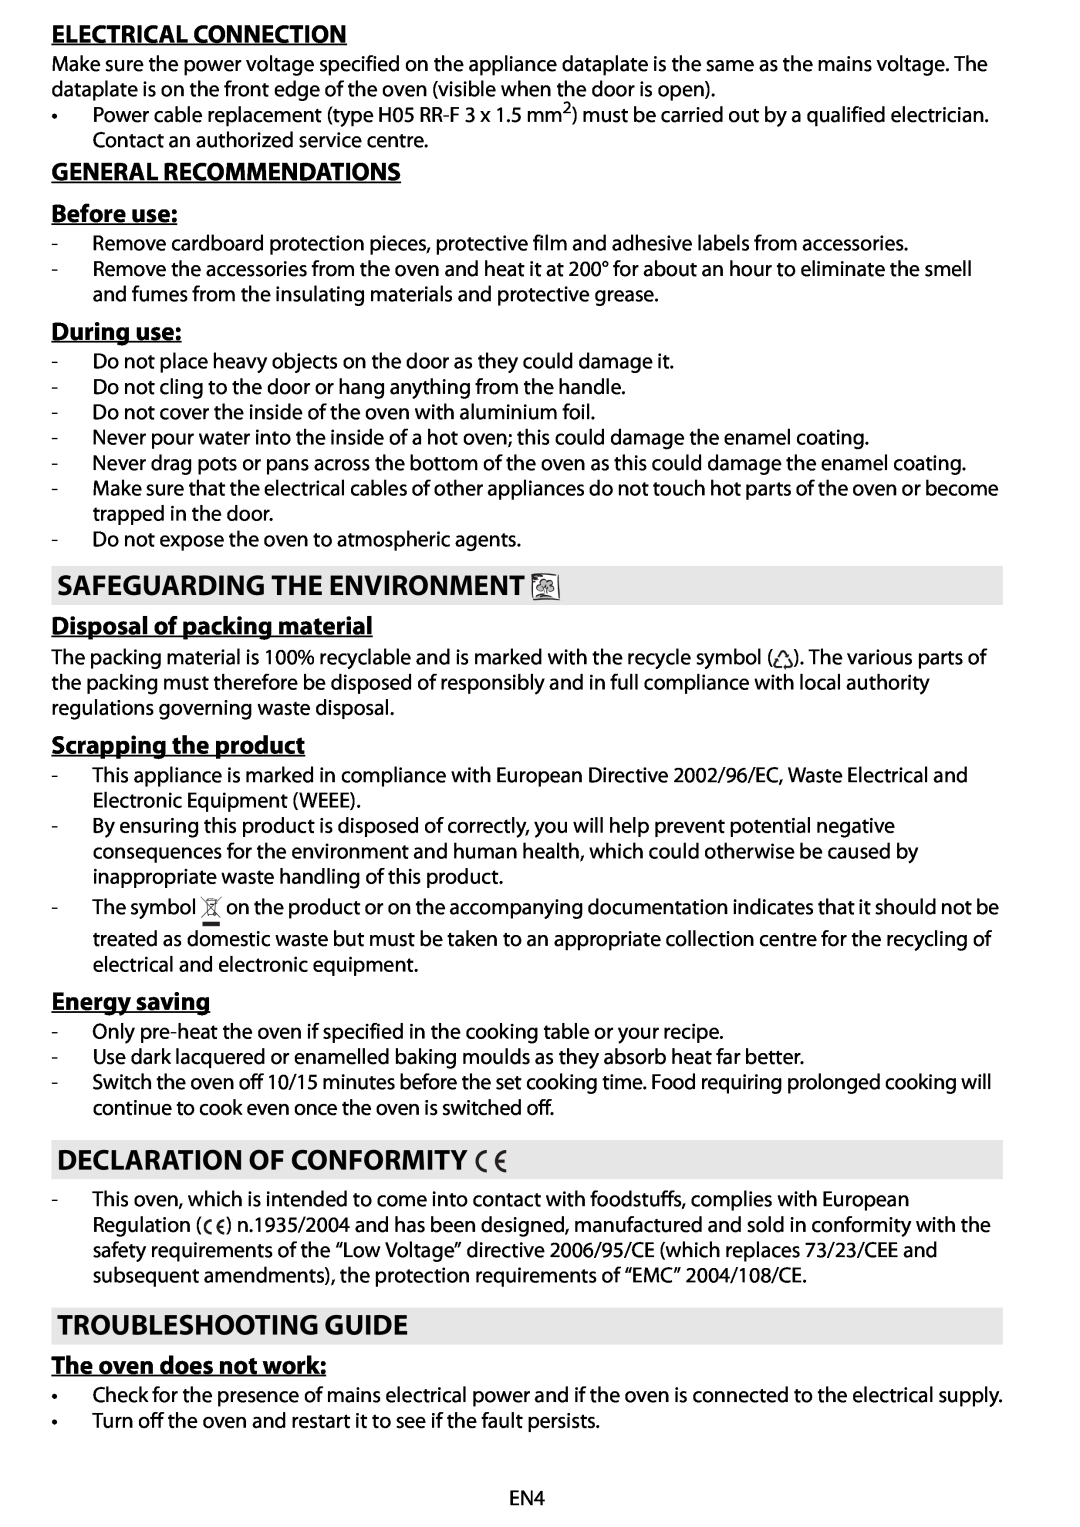 Whirlpool AKZM 654 Safeguarding The Environment, Declaration Of Conformity, Troubleshooting Guide, Electrical Connection 